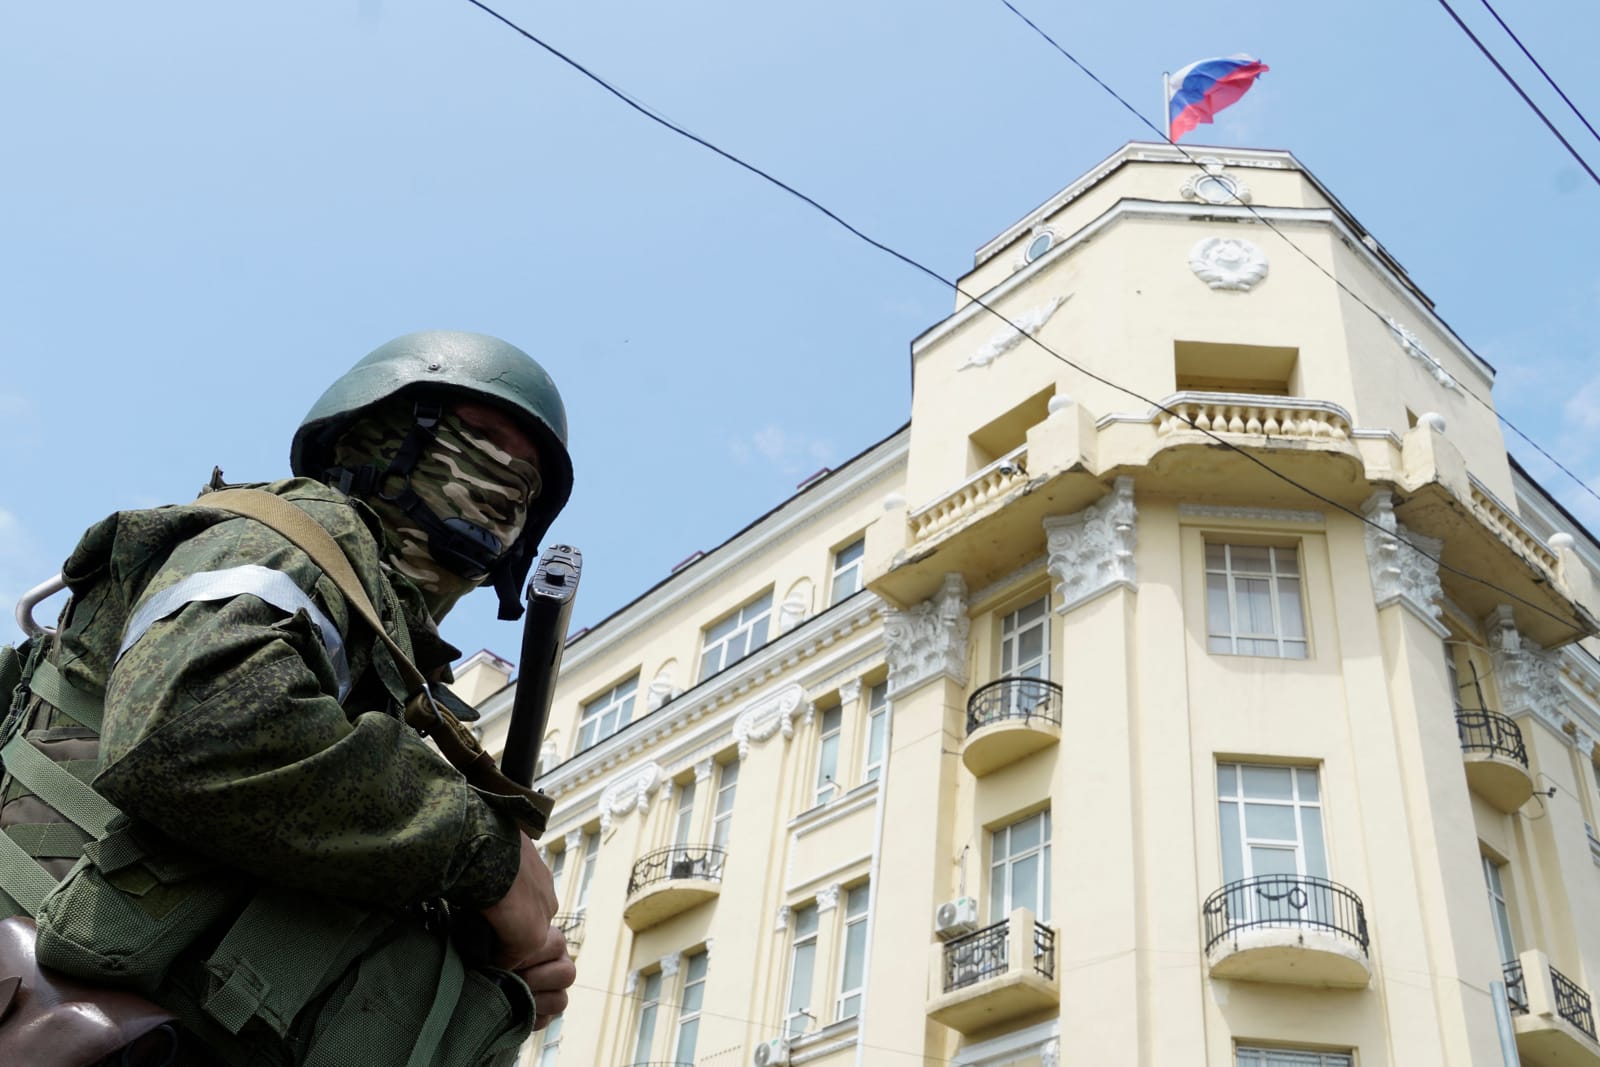 A member of Wagner group stands guard in a street in the city of Rostov-on-Don after taking control in the city on 24 June (AFP via Getty Images)